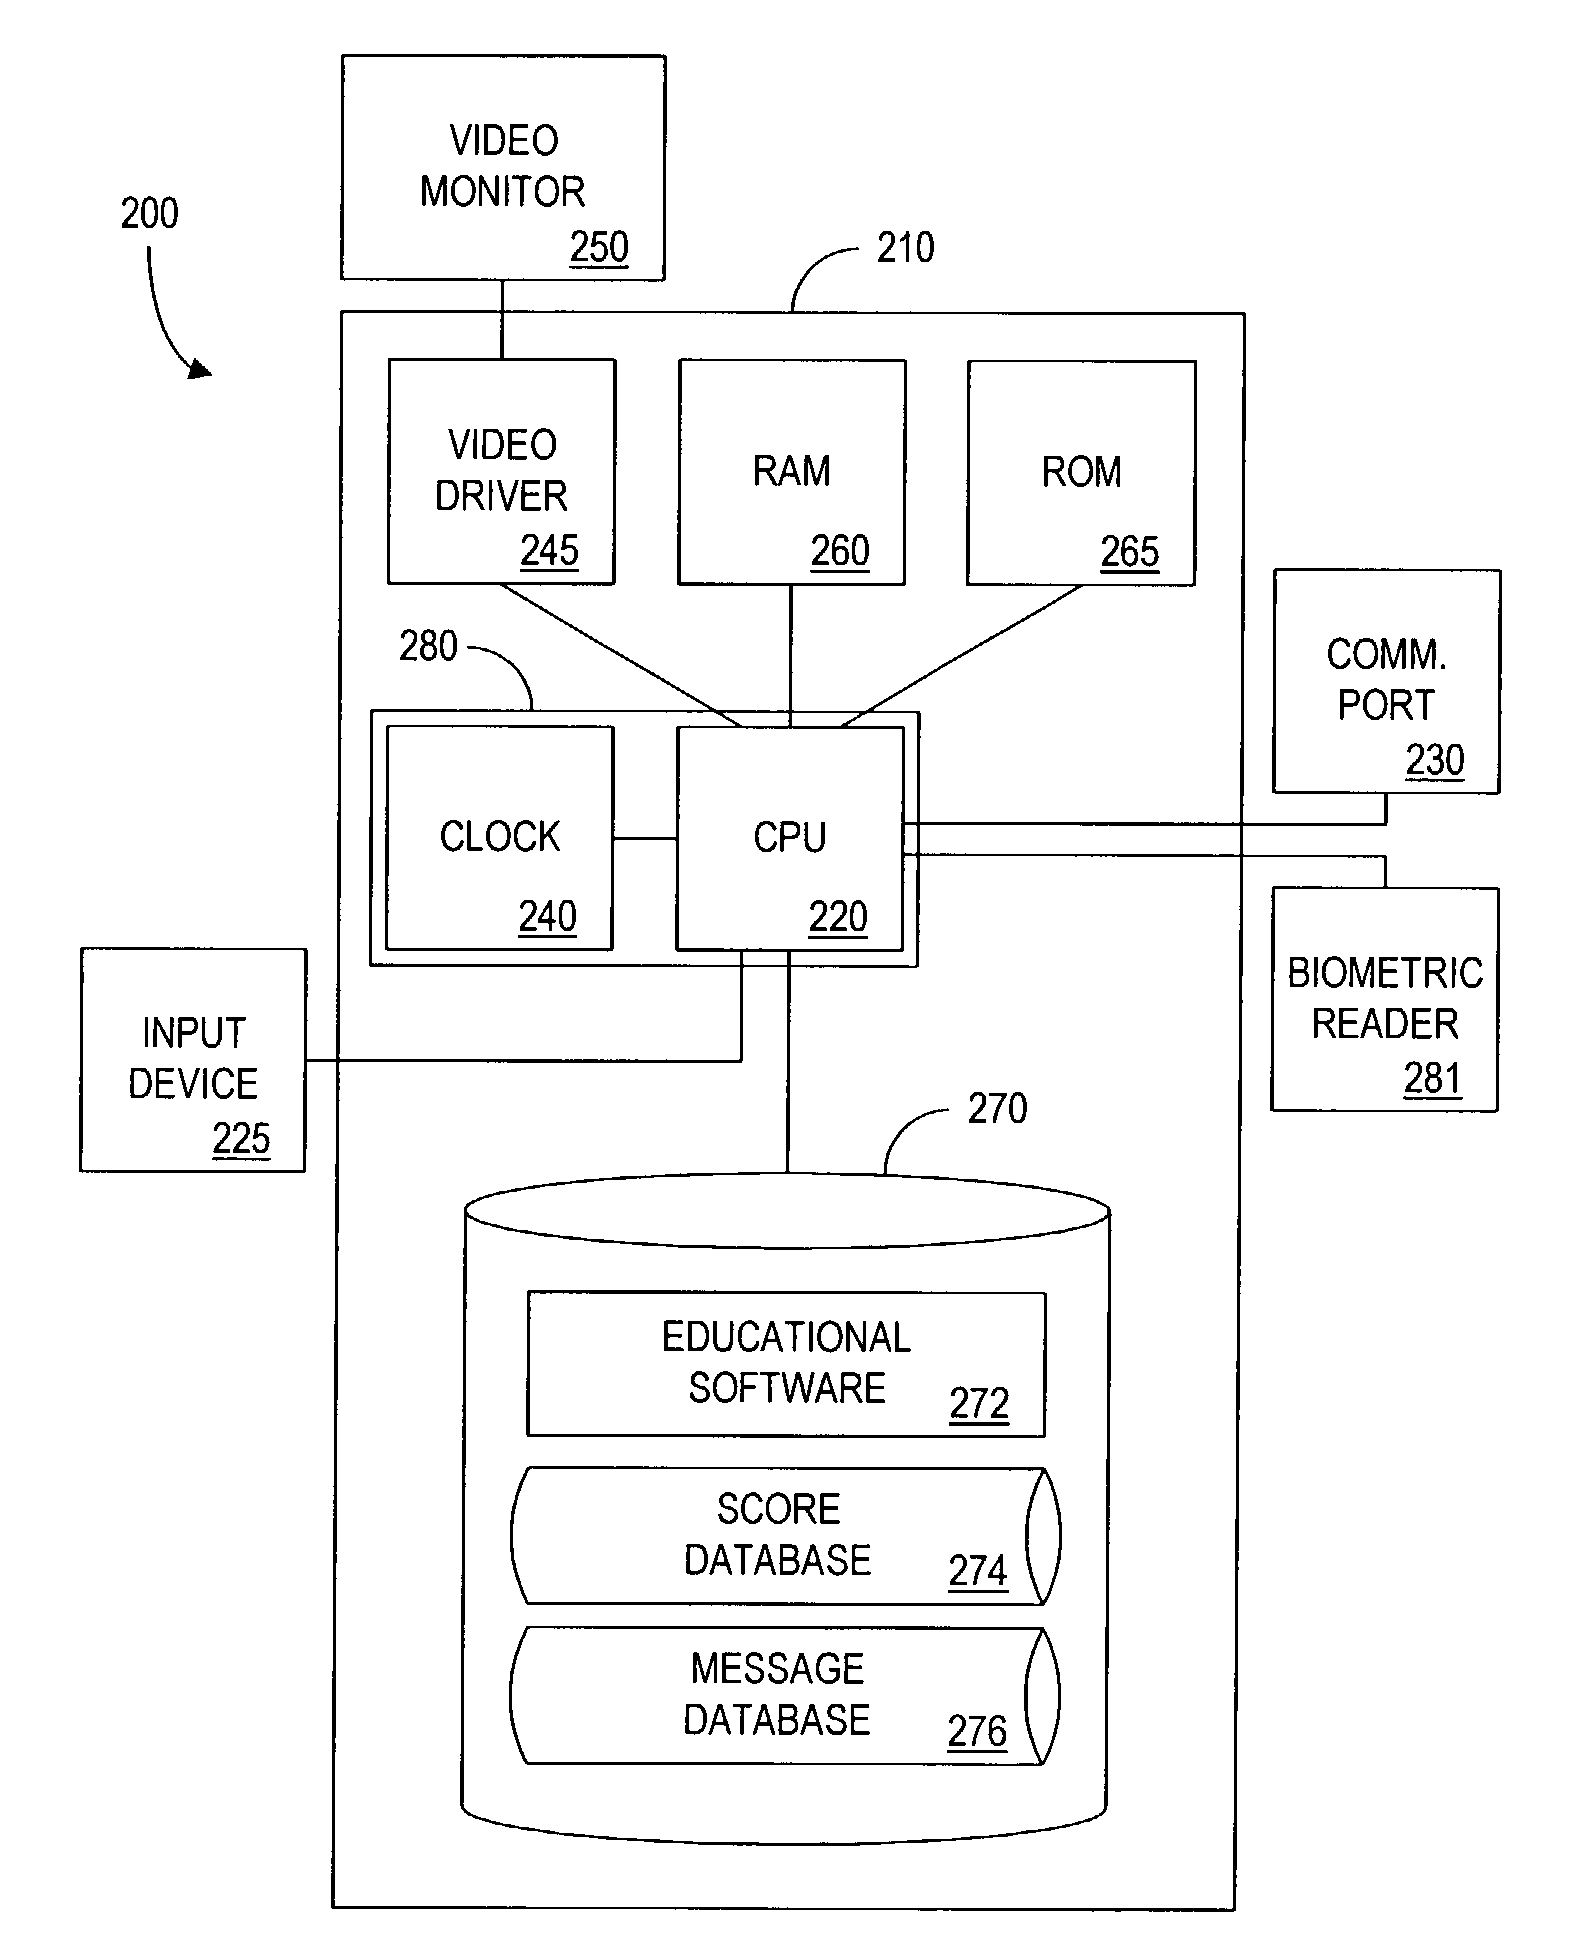 Method and apparatus for educational testing